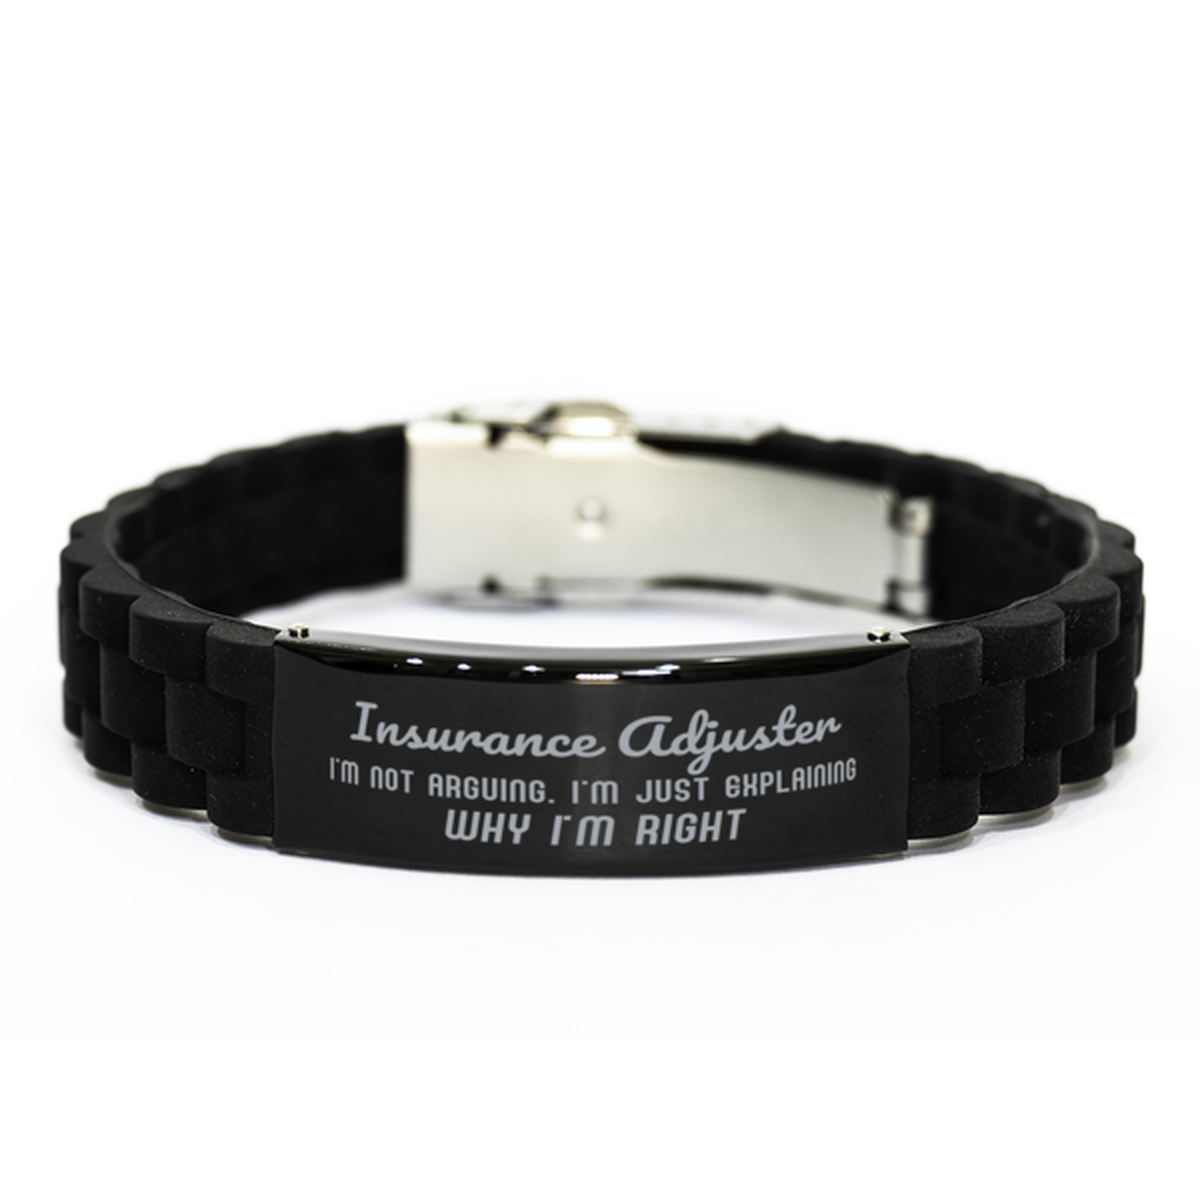 Insurance Adjuster I'm not Arguing. I'm Just Explaining Why I'm RIGHT Black Glidelock Clasp Bracelet, Funny Saying Quote Insurance Adjuster Gifts For Insurance Adjuster Graduation Birthday Christmas Gifts for Men Women Coworker